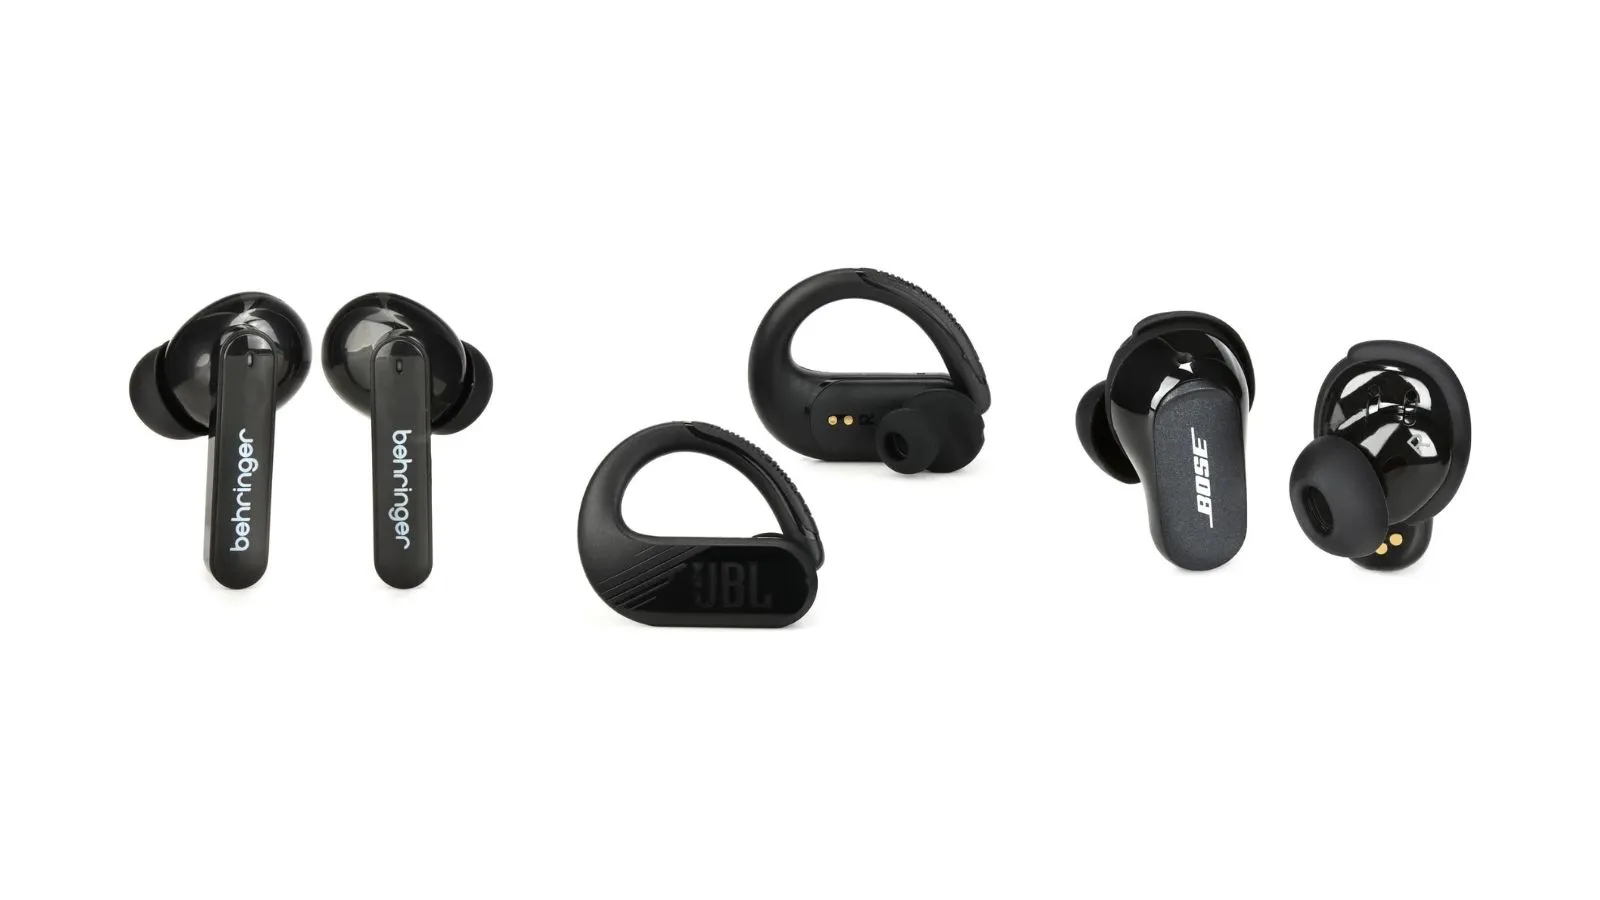 Sony The Best Truly Wireless Noise Canceling Earbuds, Black